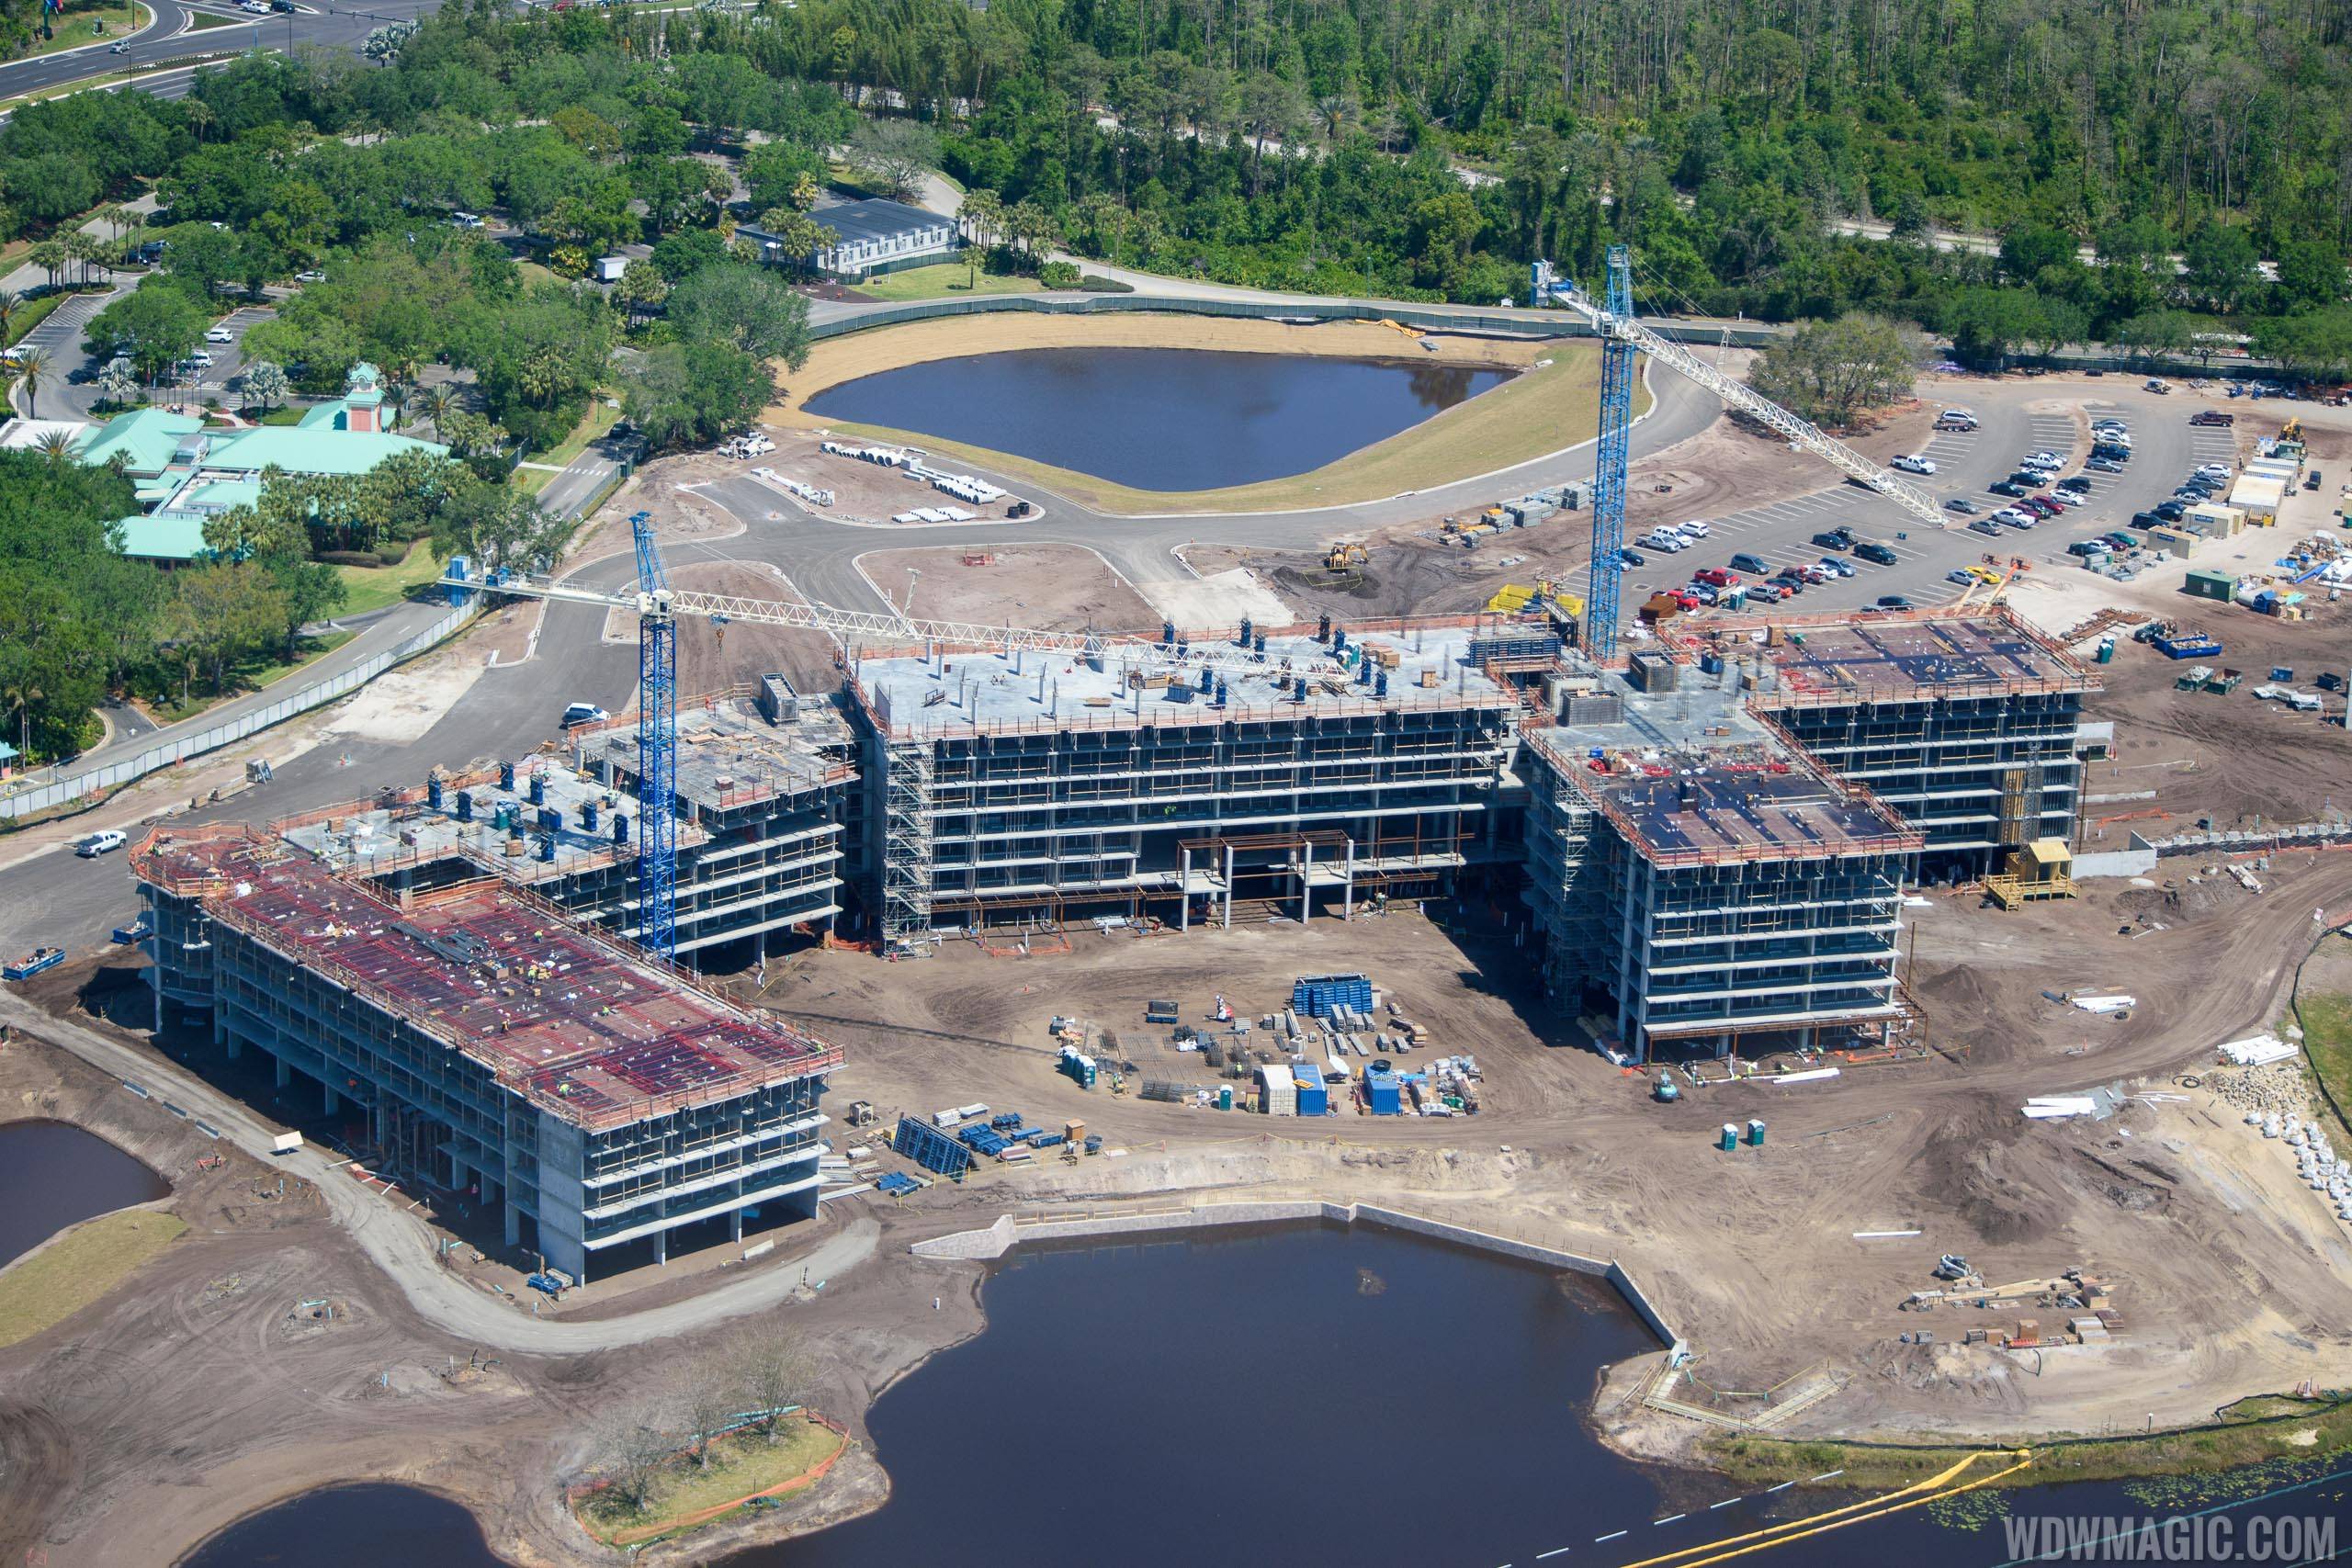 Disney Riviera construction from the air - March 2018